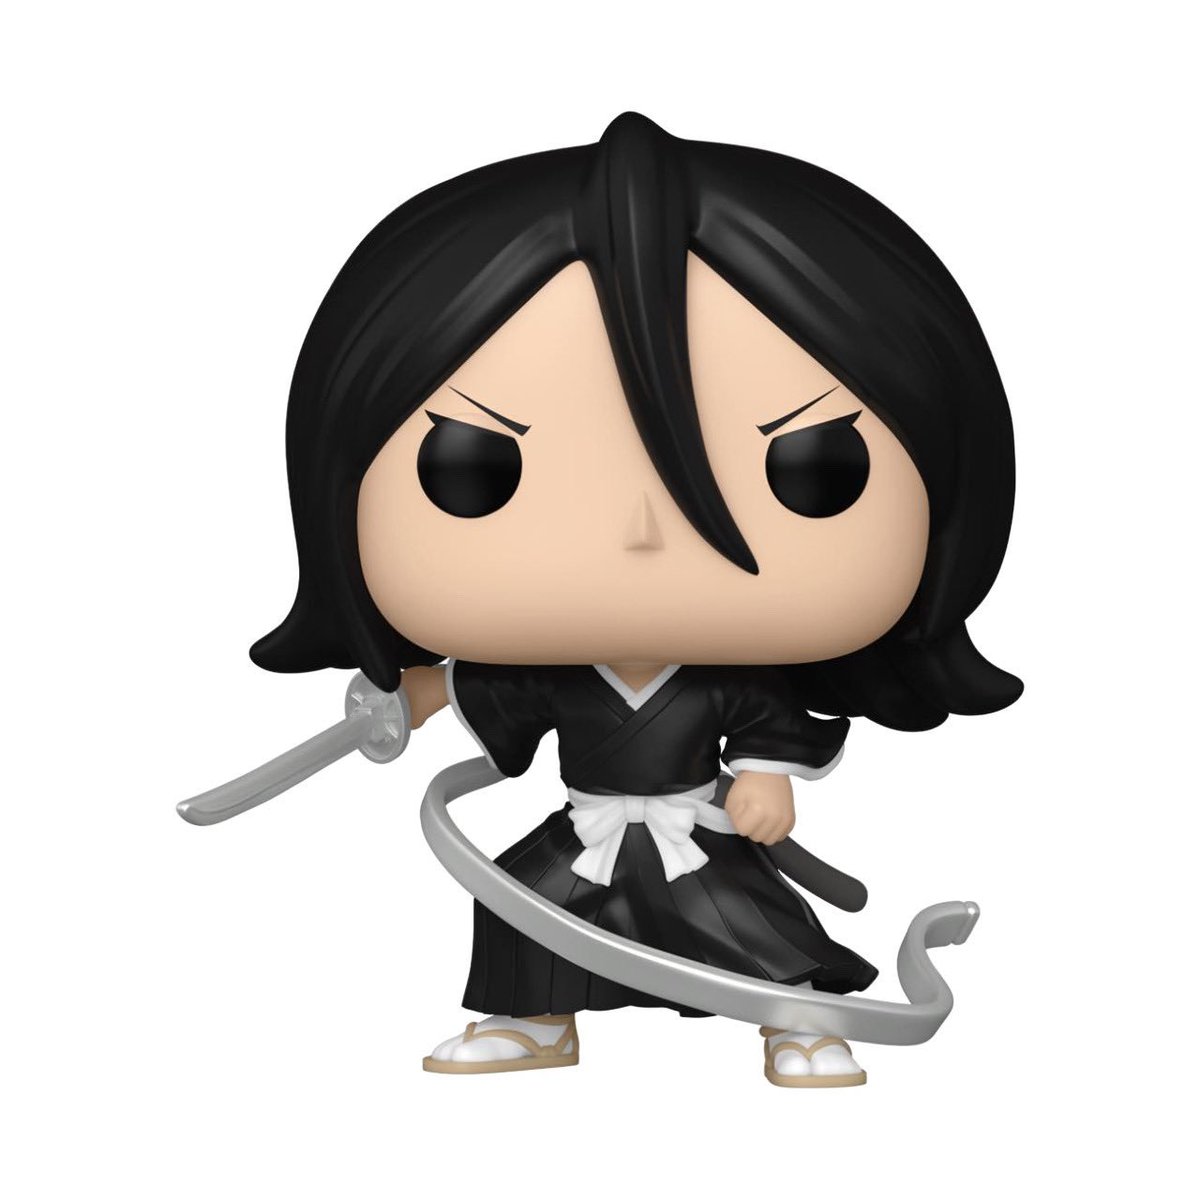 First look at the new Rukia Funko POP! Coming soon exclusively to the F Shop ~ #Rukia #Bleach #FPN #FunkoPOPNews #Funko #POP #Funkos #POPVinyl #FunkoPOP #FunkoPOPs #FunkoSoda